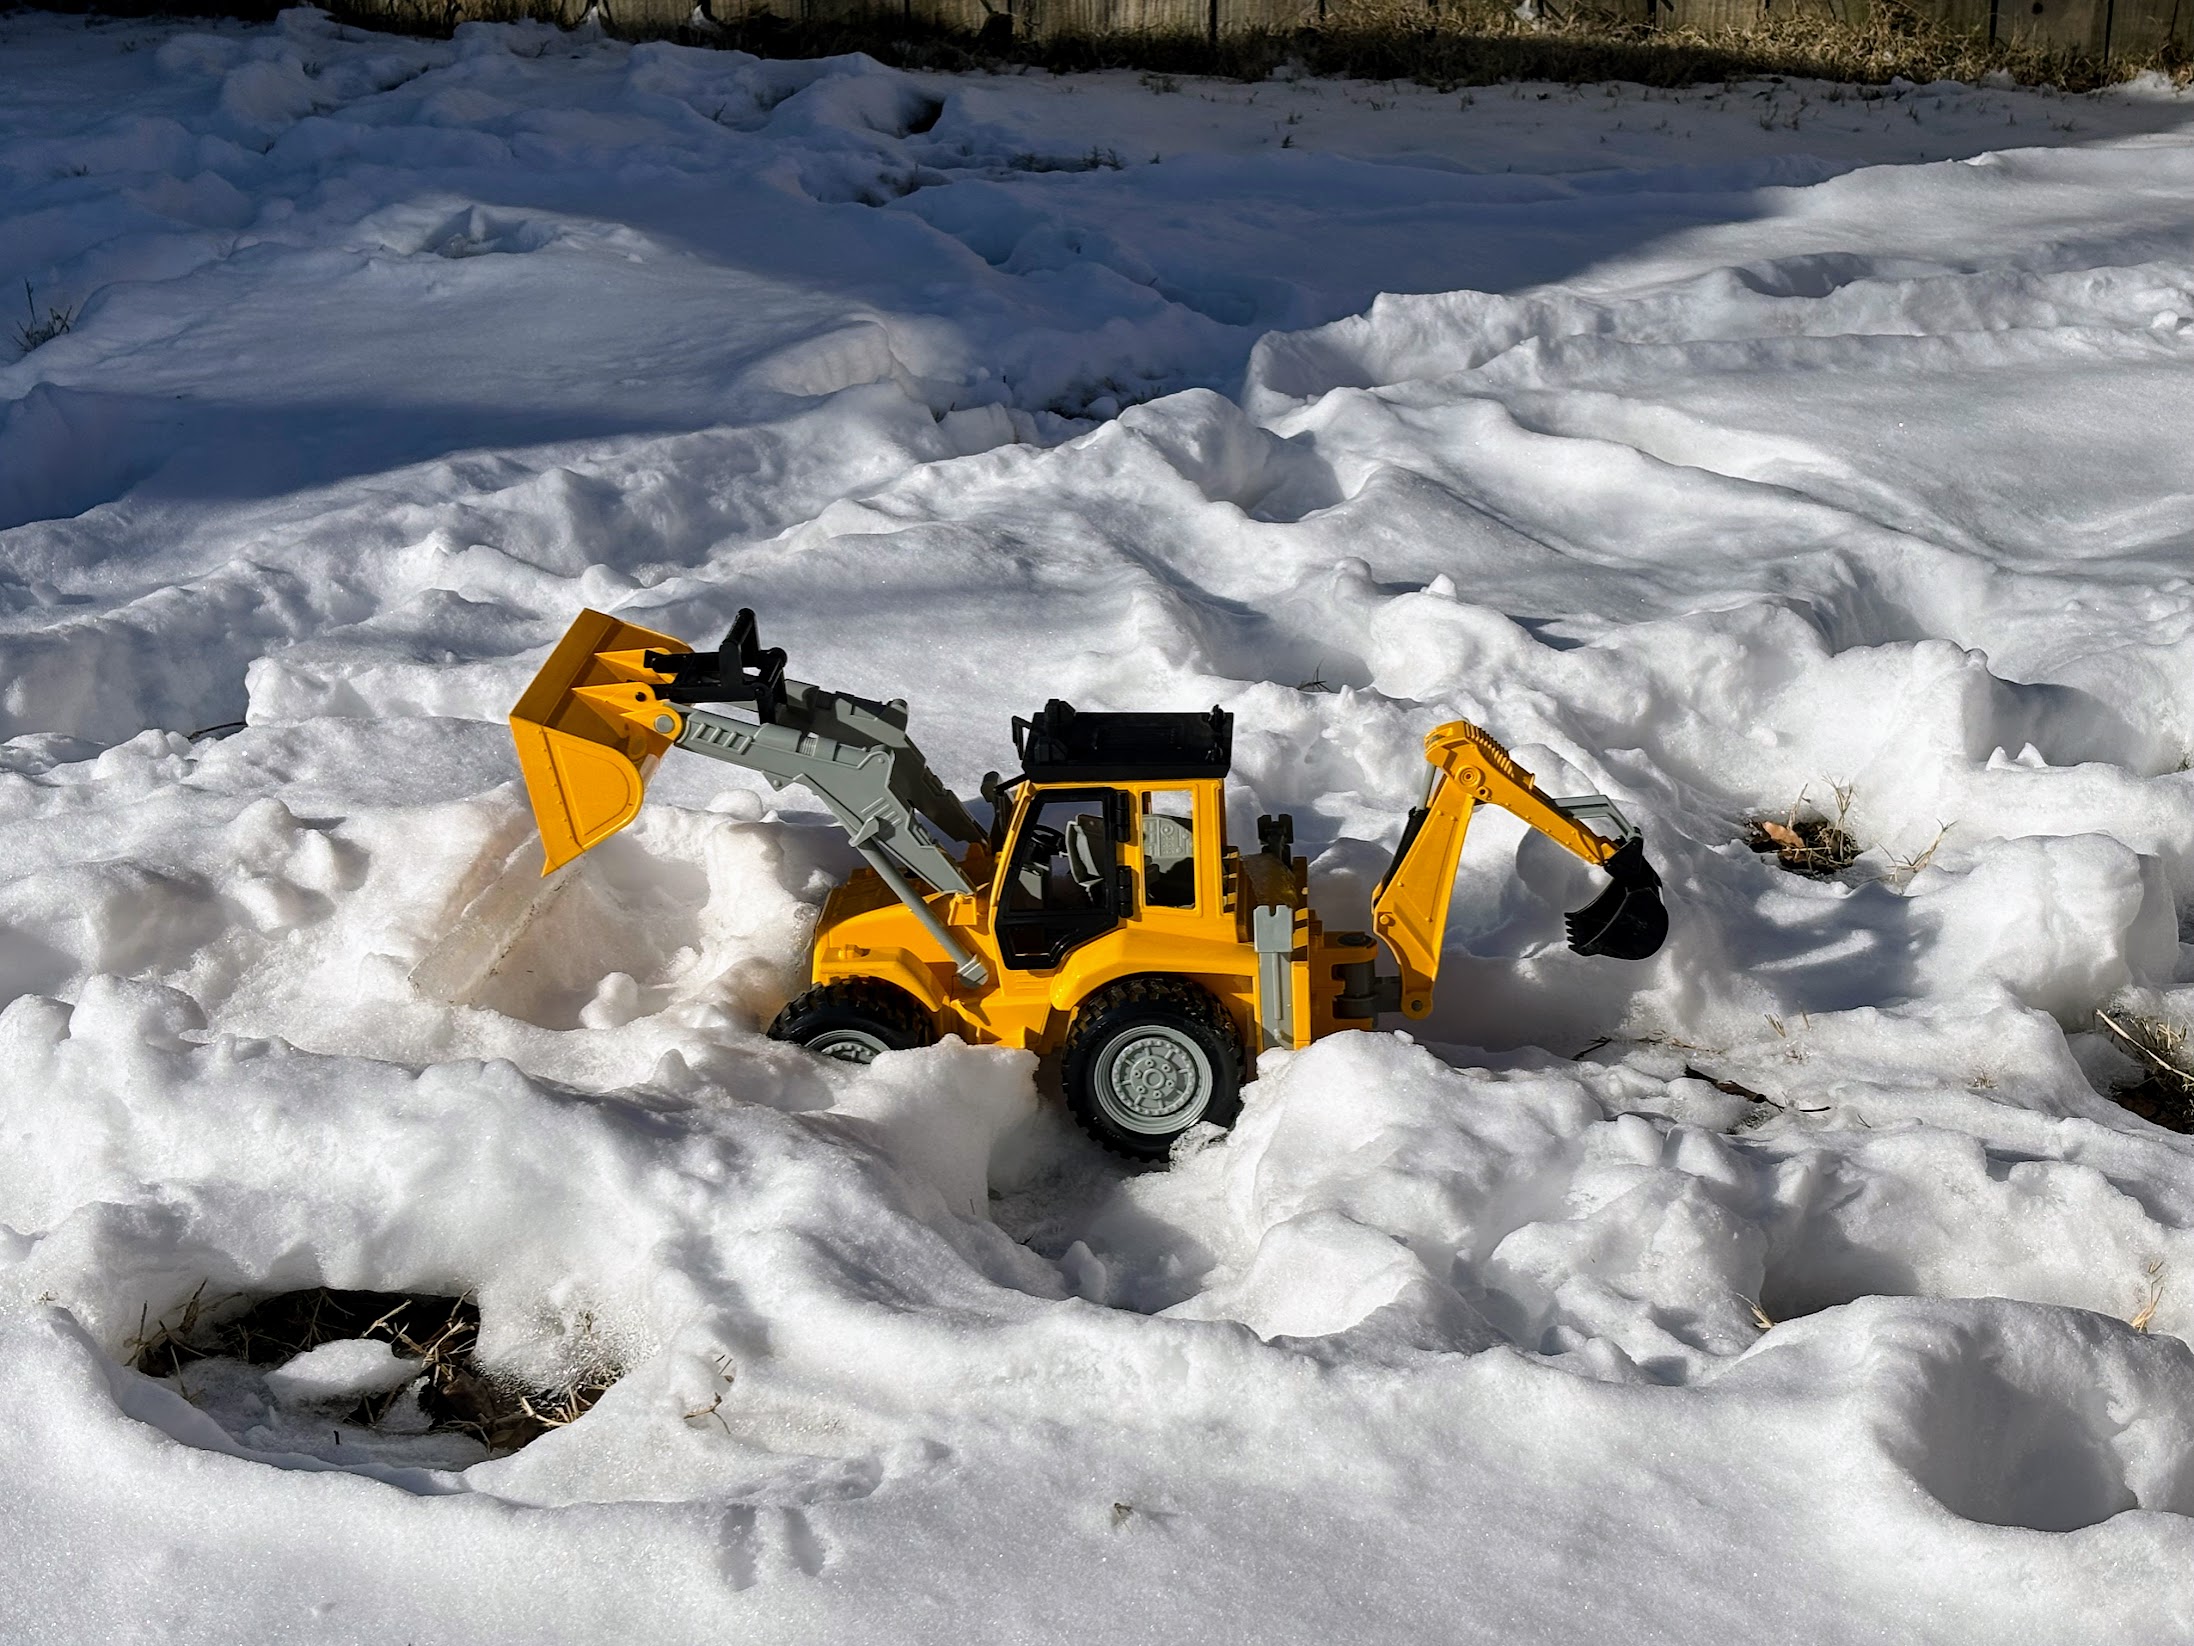 a toy tractor in the snow